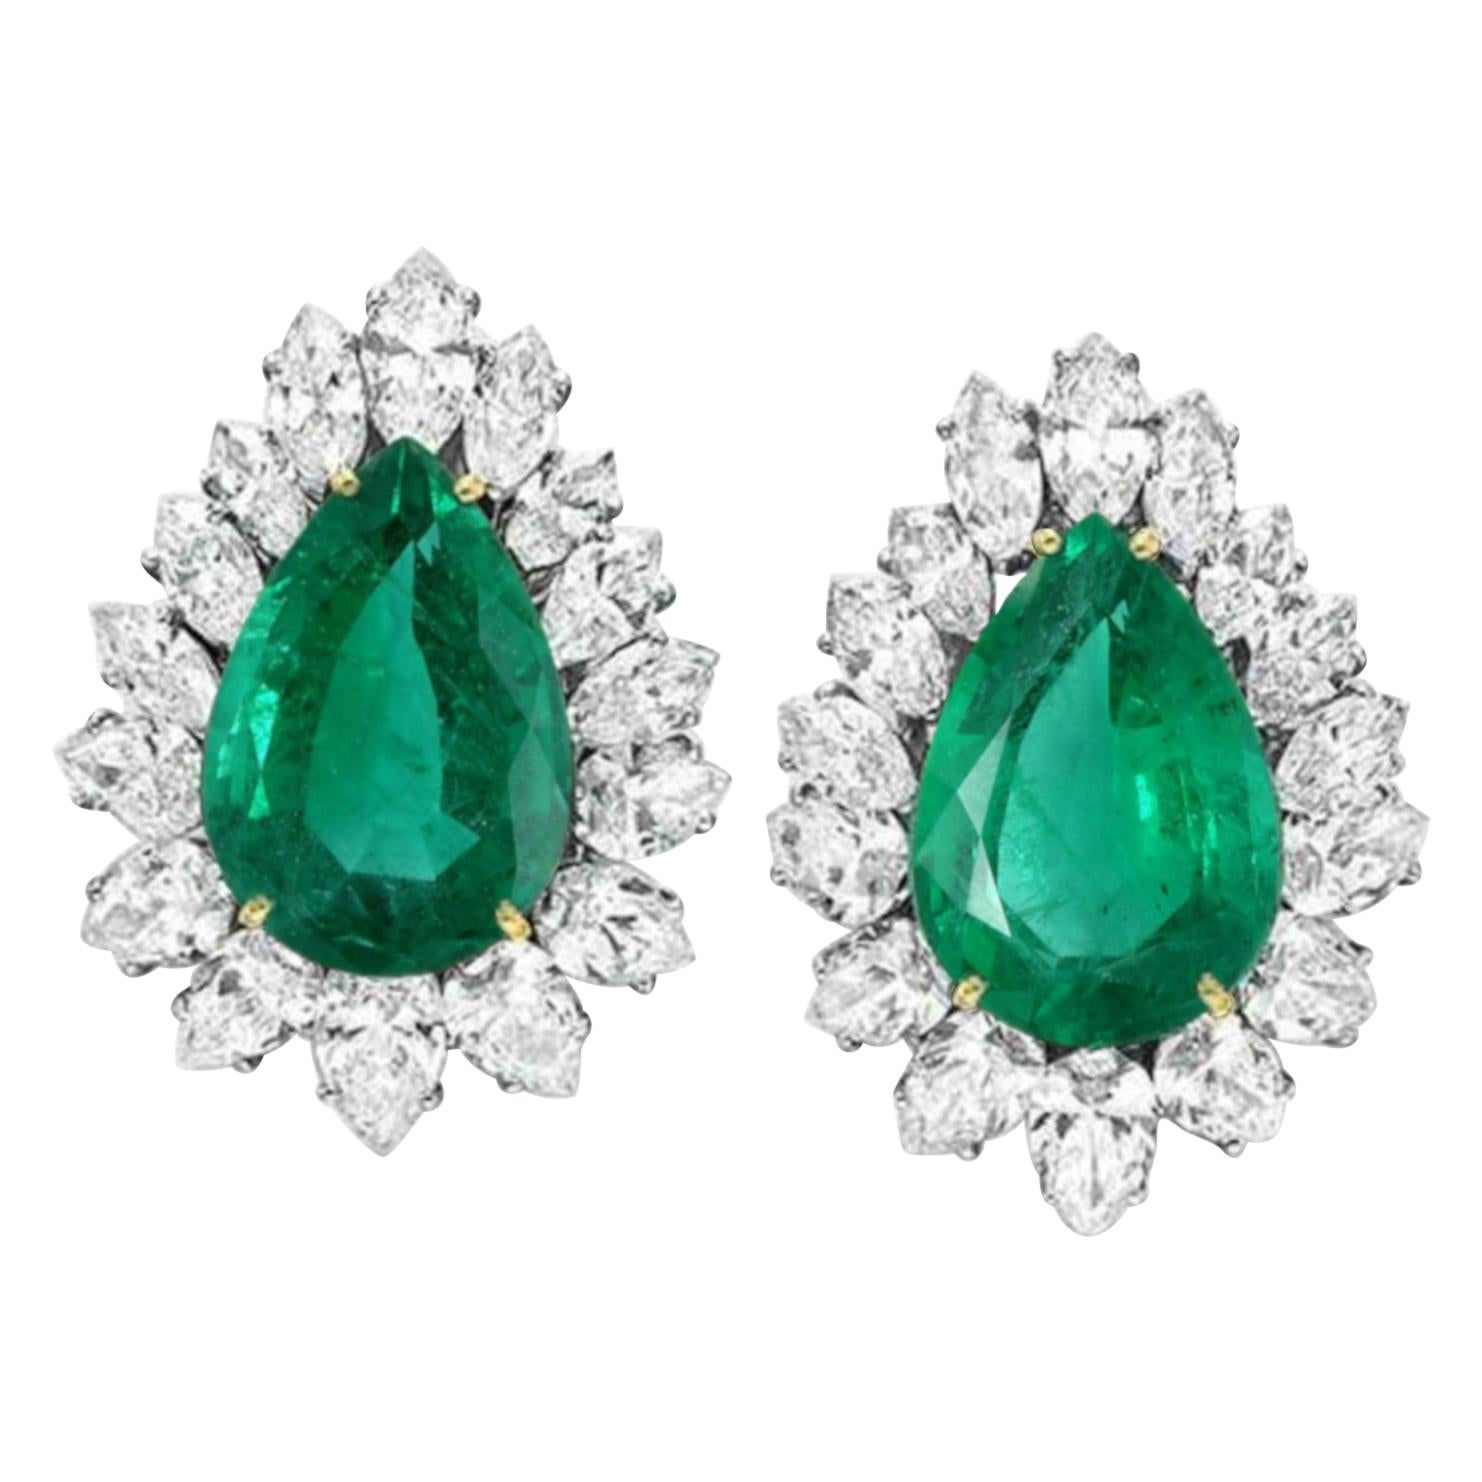 GIA and AGL Certified 24.54 Carat Pear Cut Emeralds Earrings